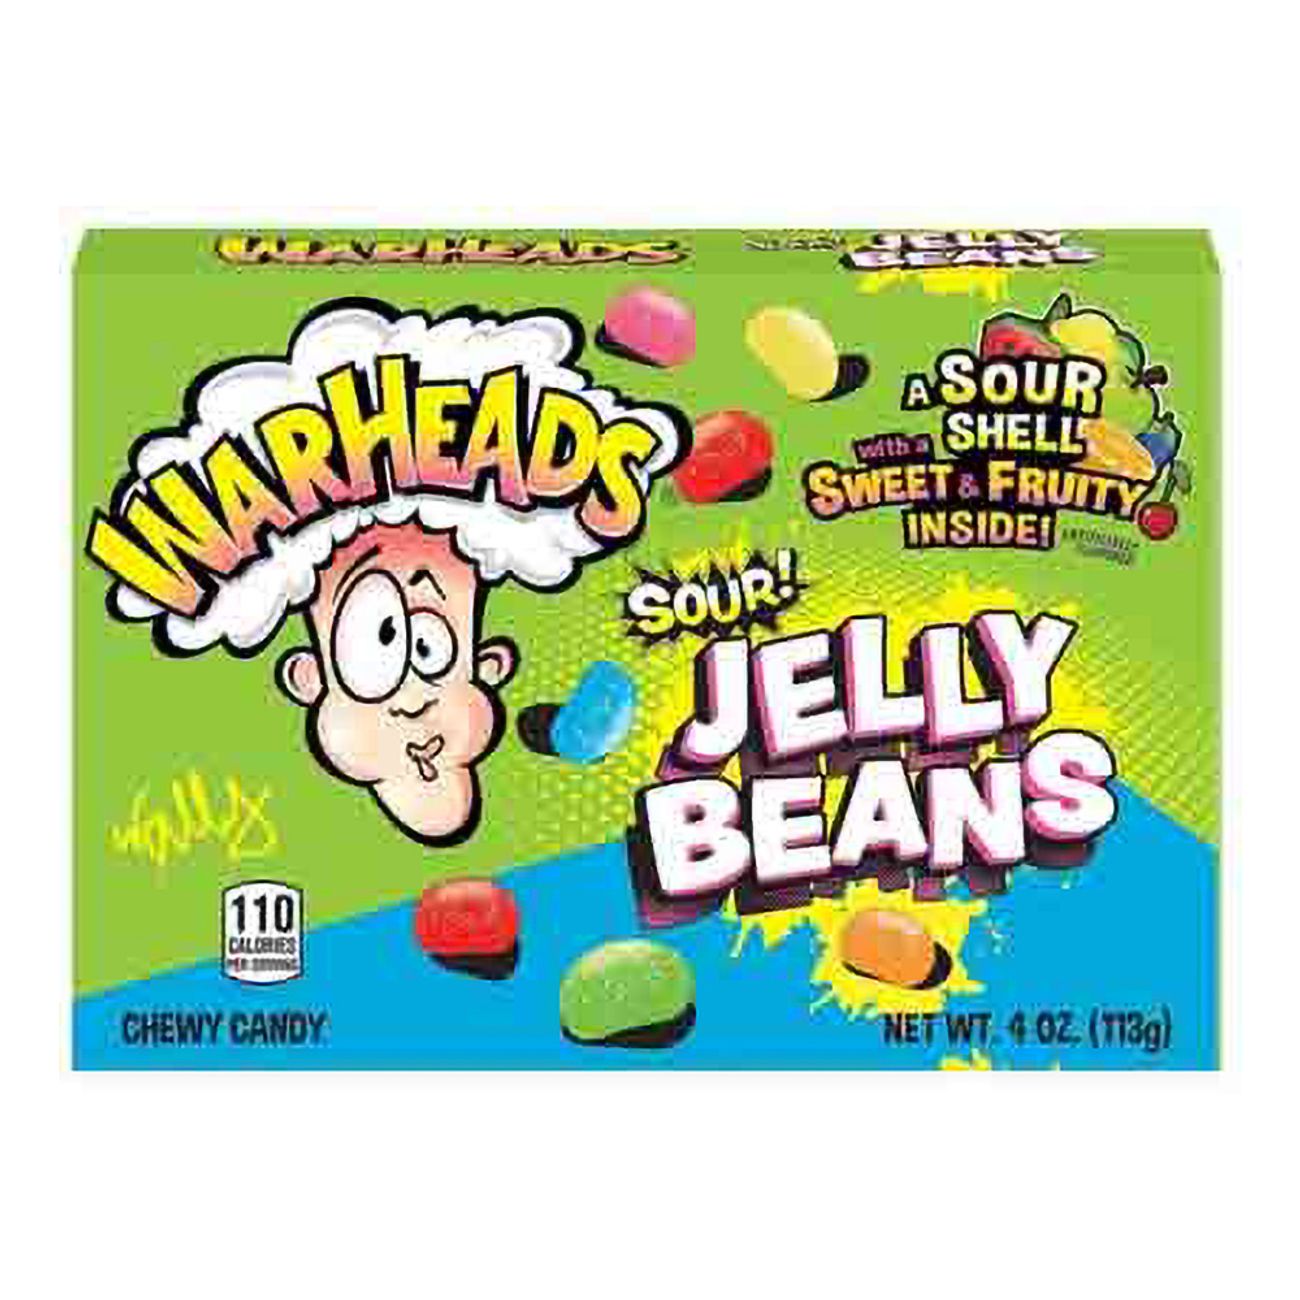 warheads-sour-jelly-beans-78526-2